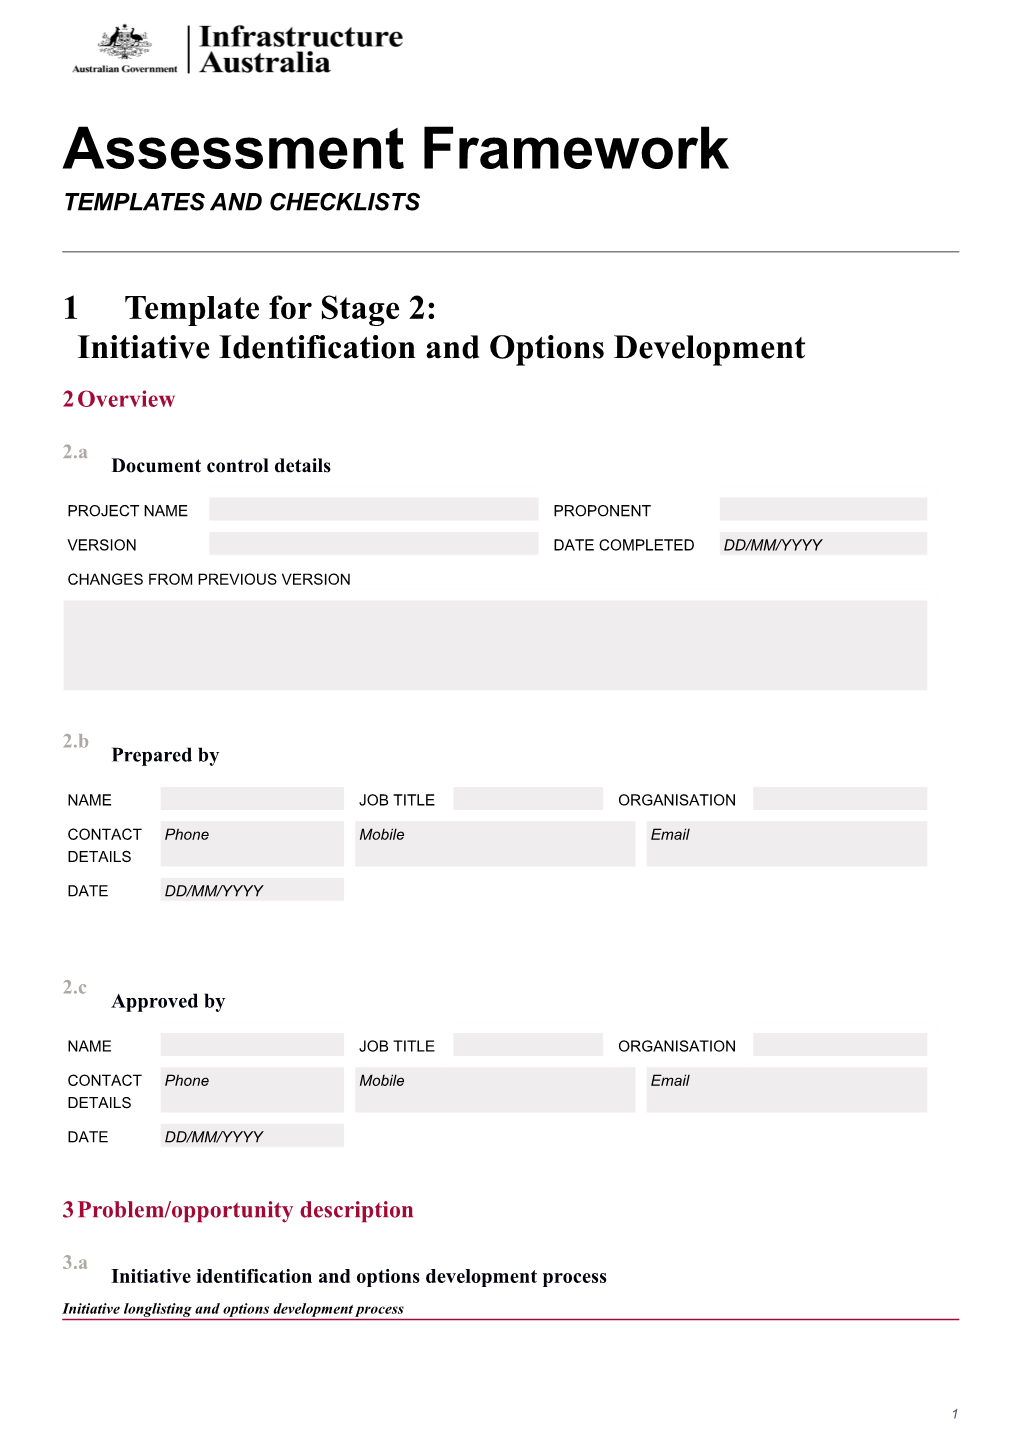 Template for Stage 2:Initiative Identification and Options Development